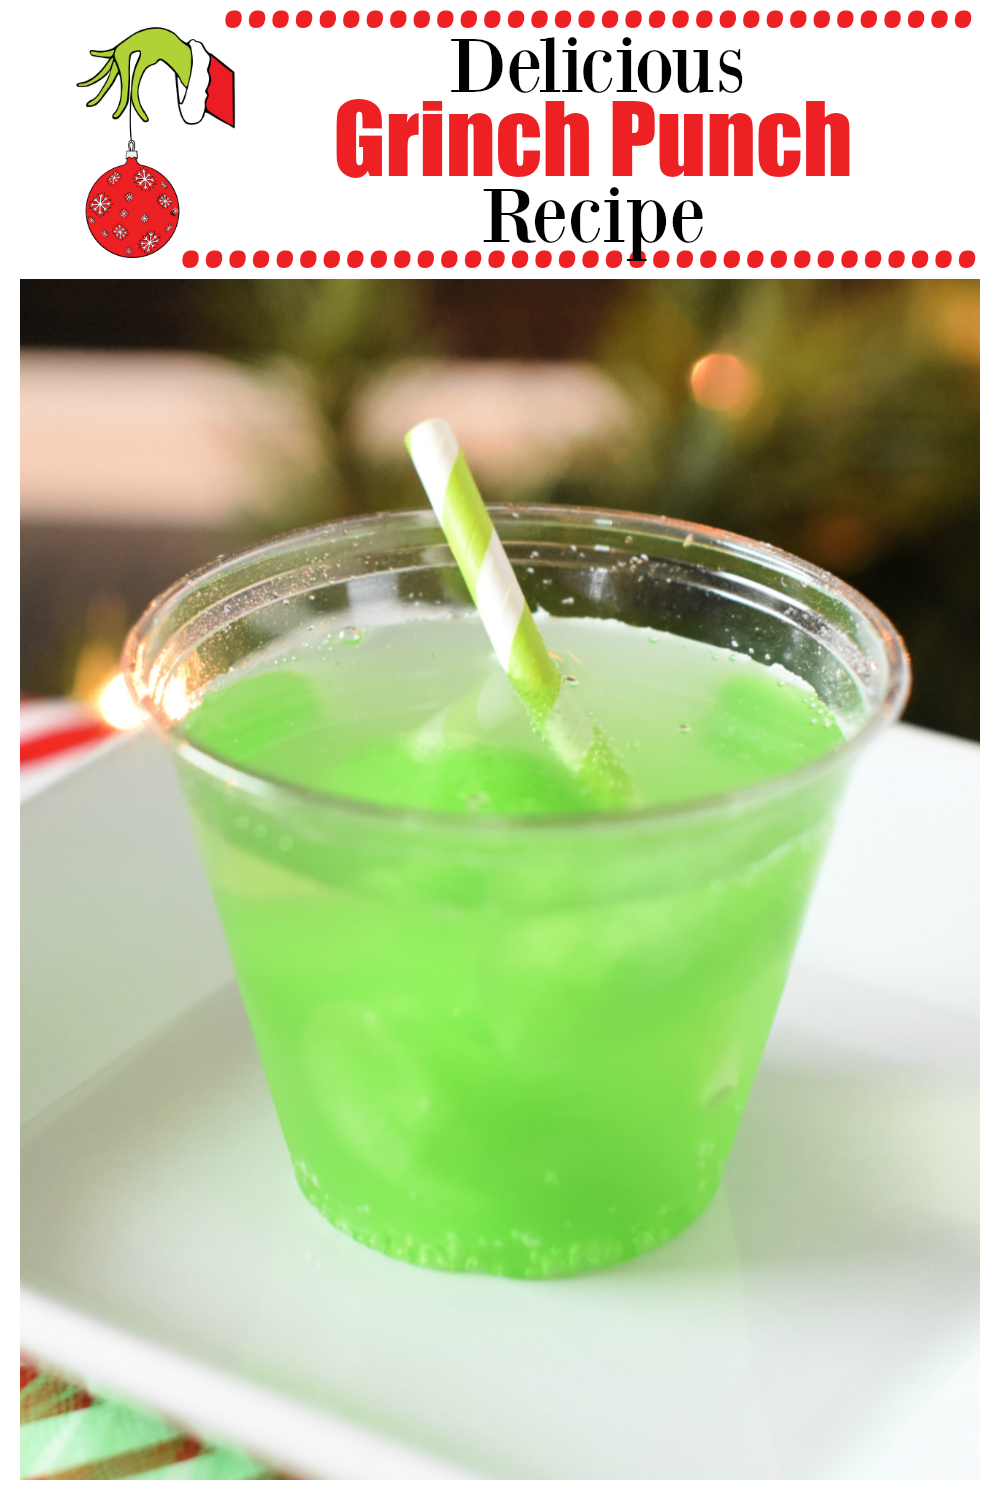 Fun and simple Grinch Punch Recipe. This Grinch punch is so yummy and a fun addition to your next Grinch party. #Grinchparty #Thegrinch #fungrinchparty #holidayparty